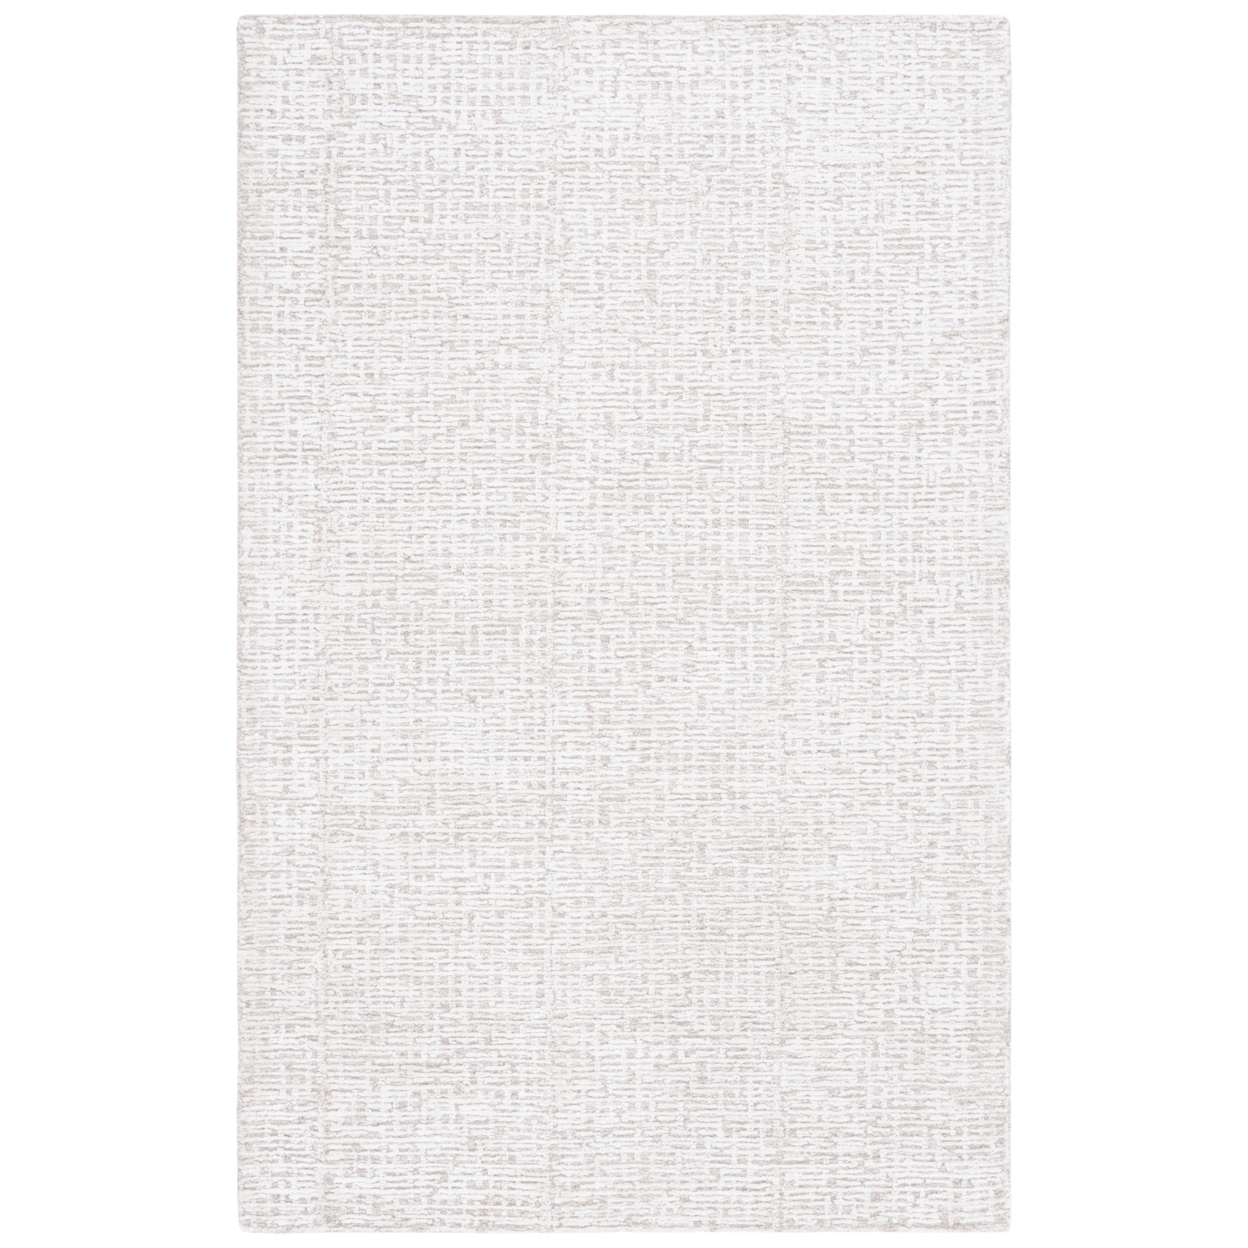 Safavieh GLM601A Glamour Natural / Ivory - Ivory / Black, 4' X 6' Rectangle